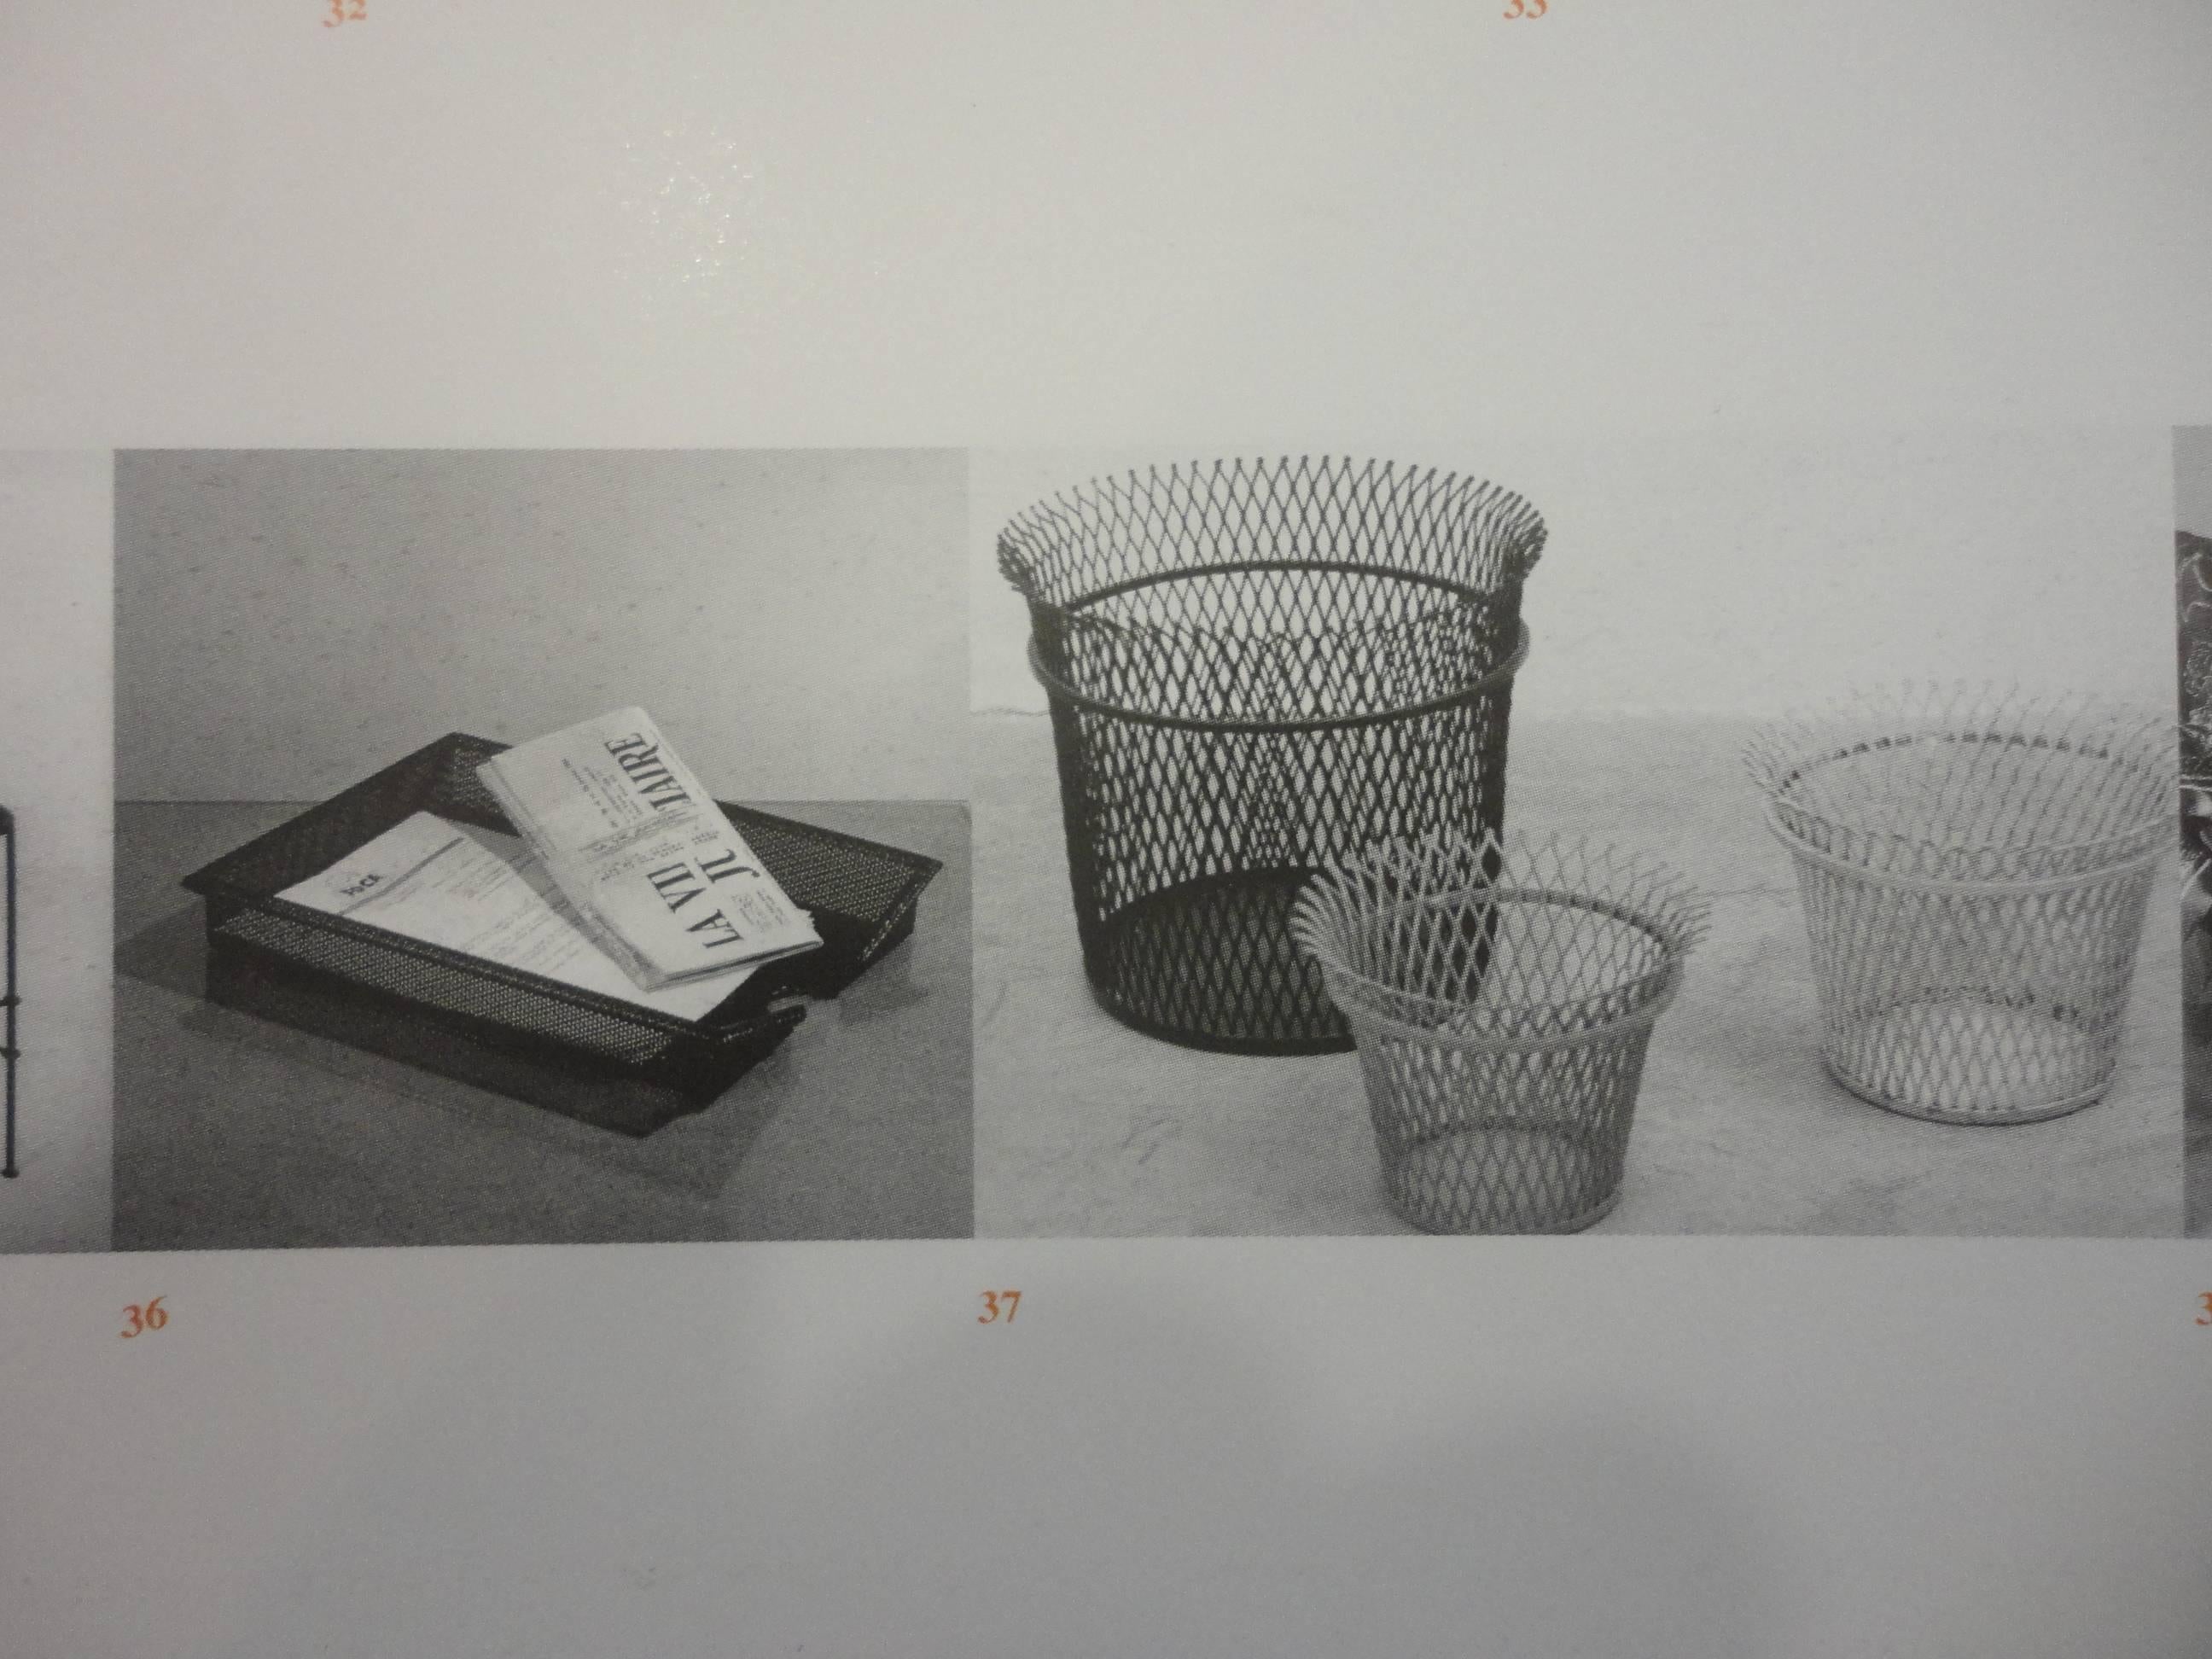 Mid-20th Century Documented Wastepaper Basket by Mathieu Mategot, 1951